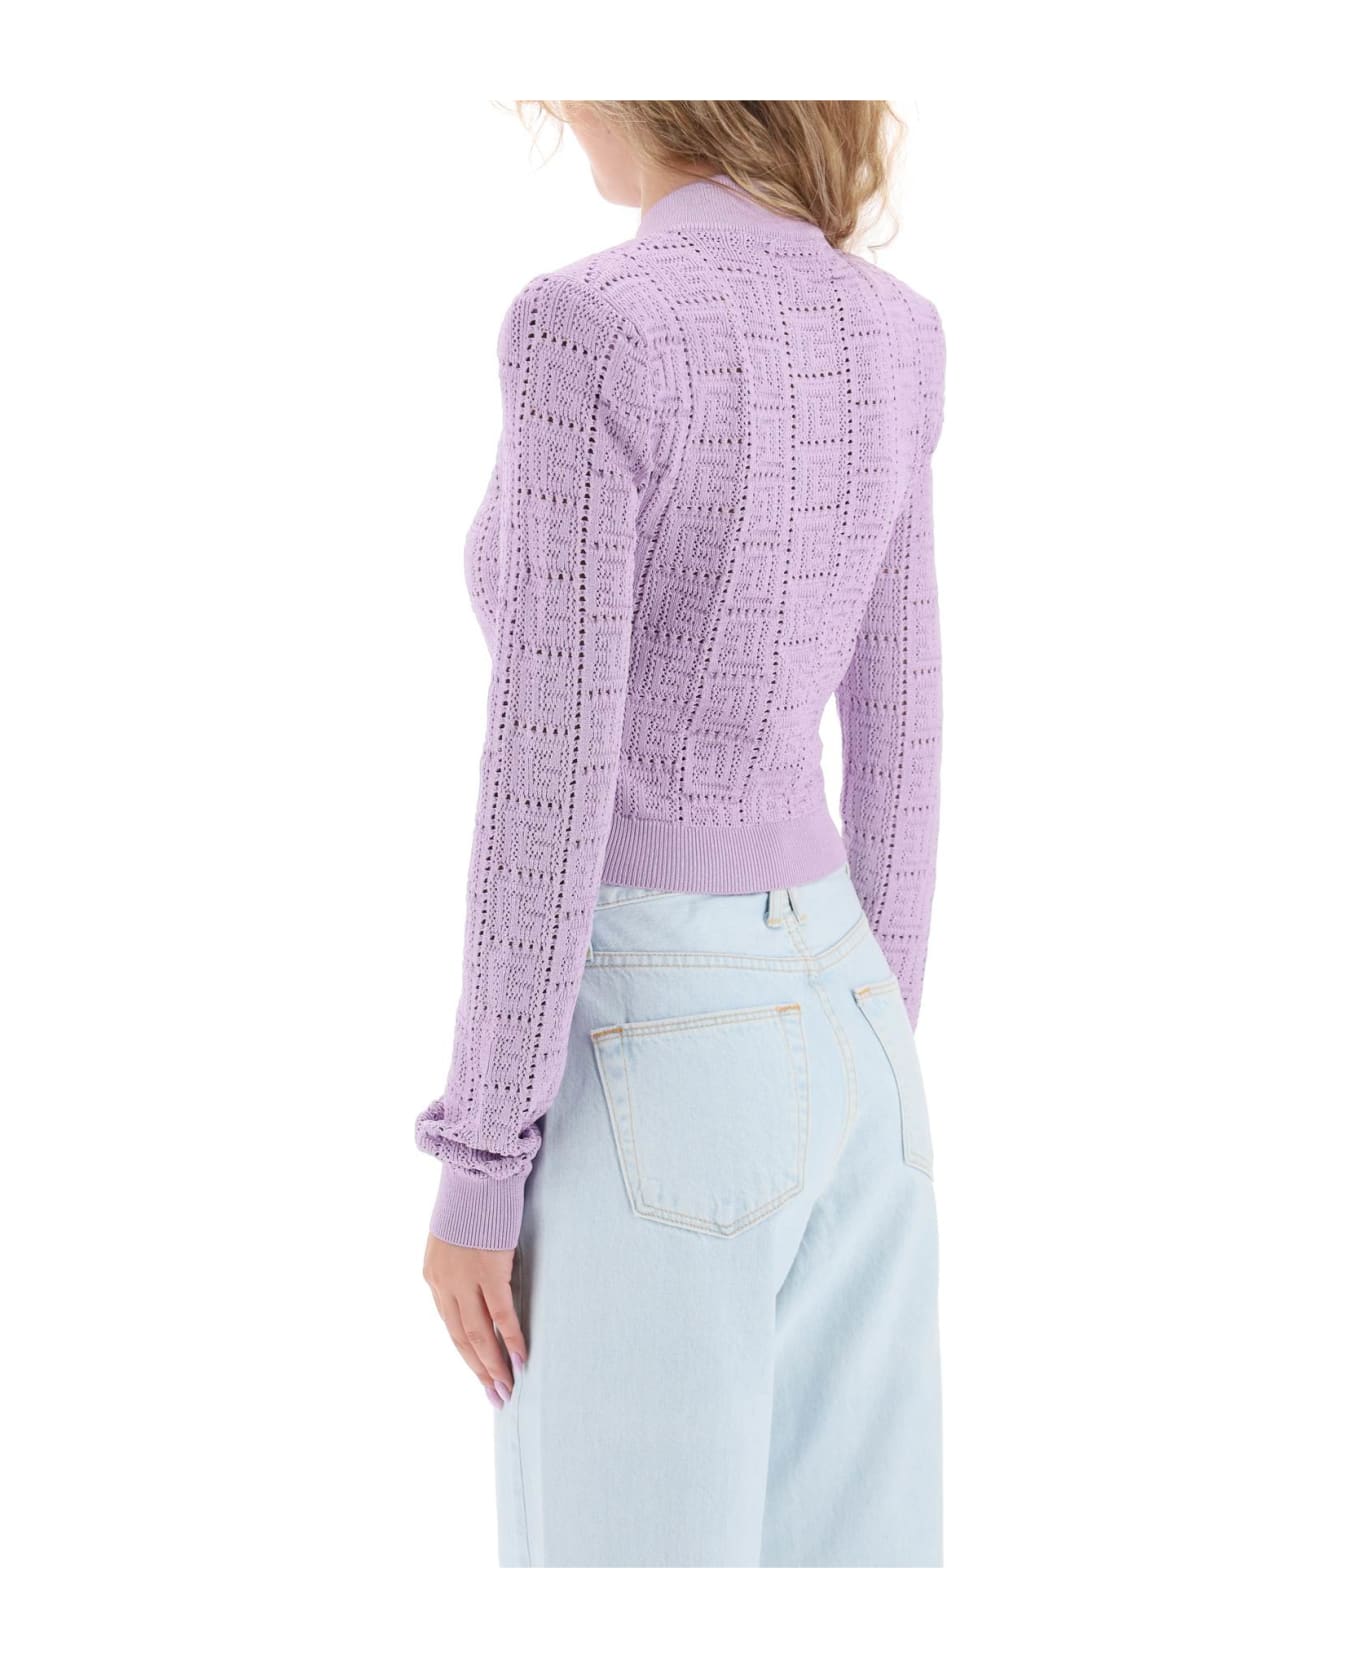 Balmain Crew-neck Cardigan With Embossed Buttons - PARME (Purple)